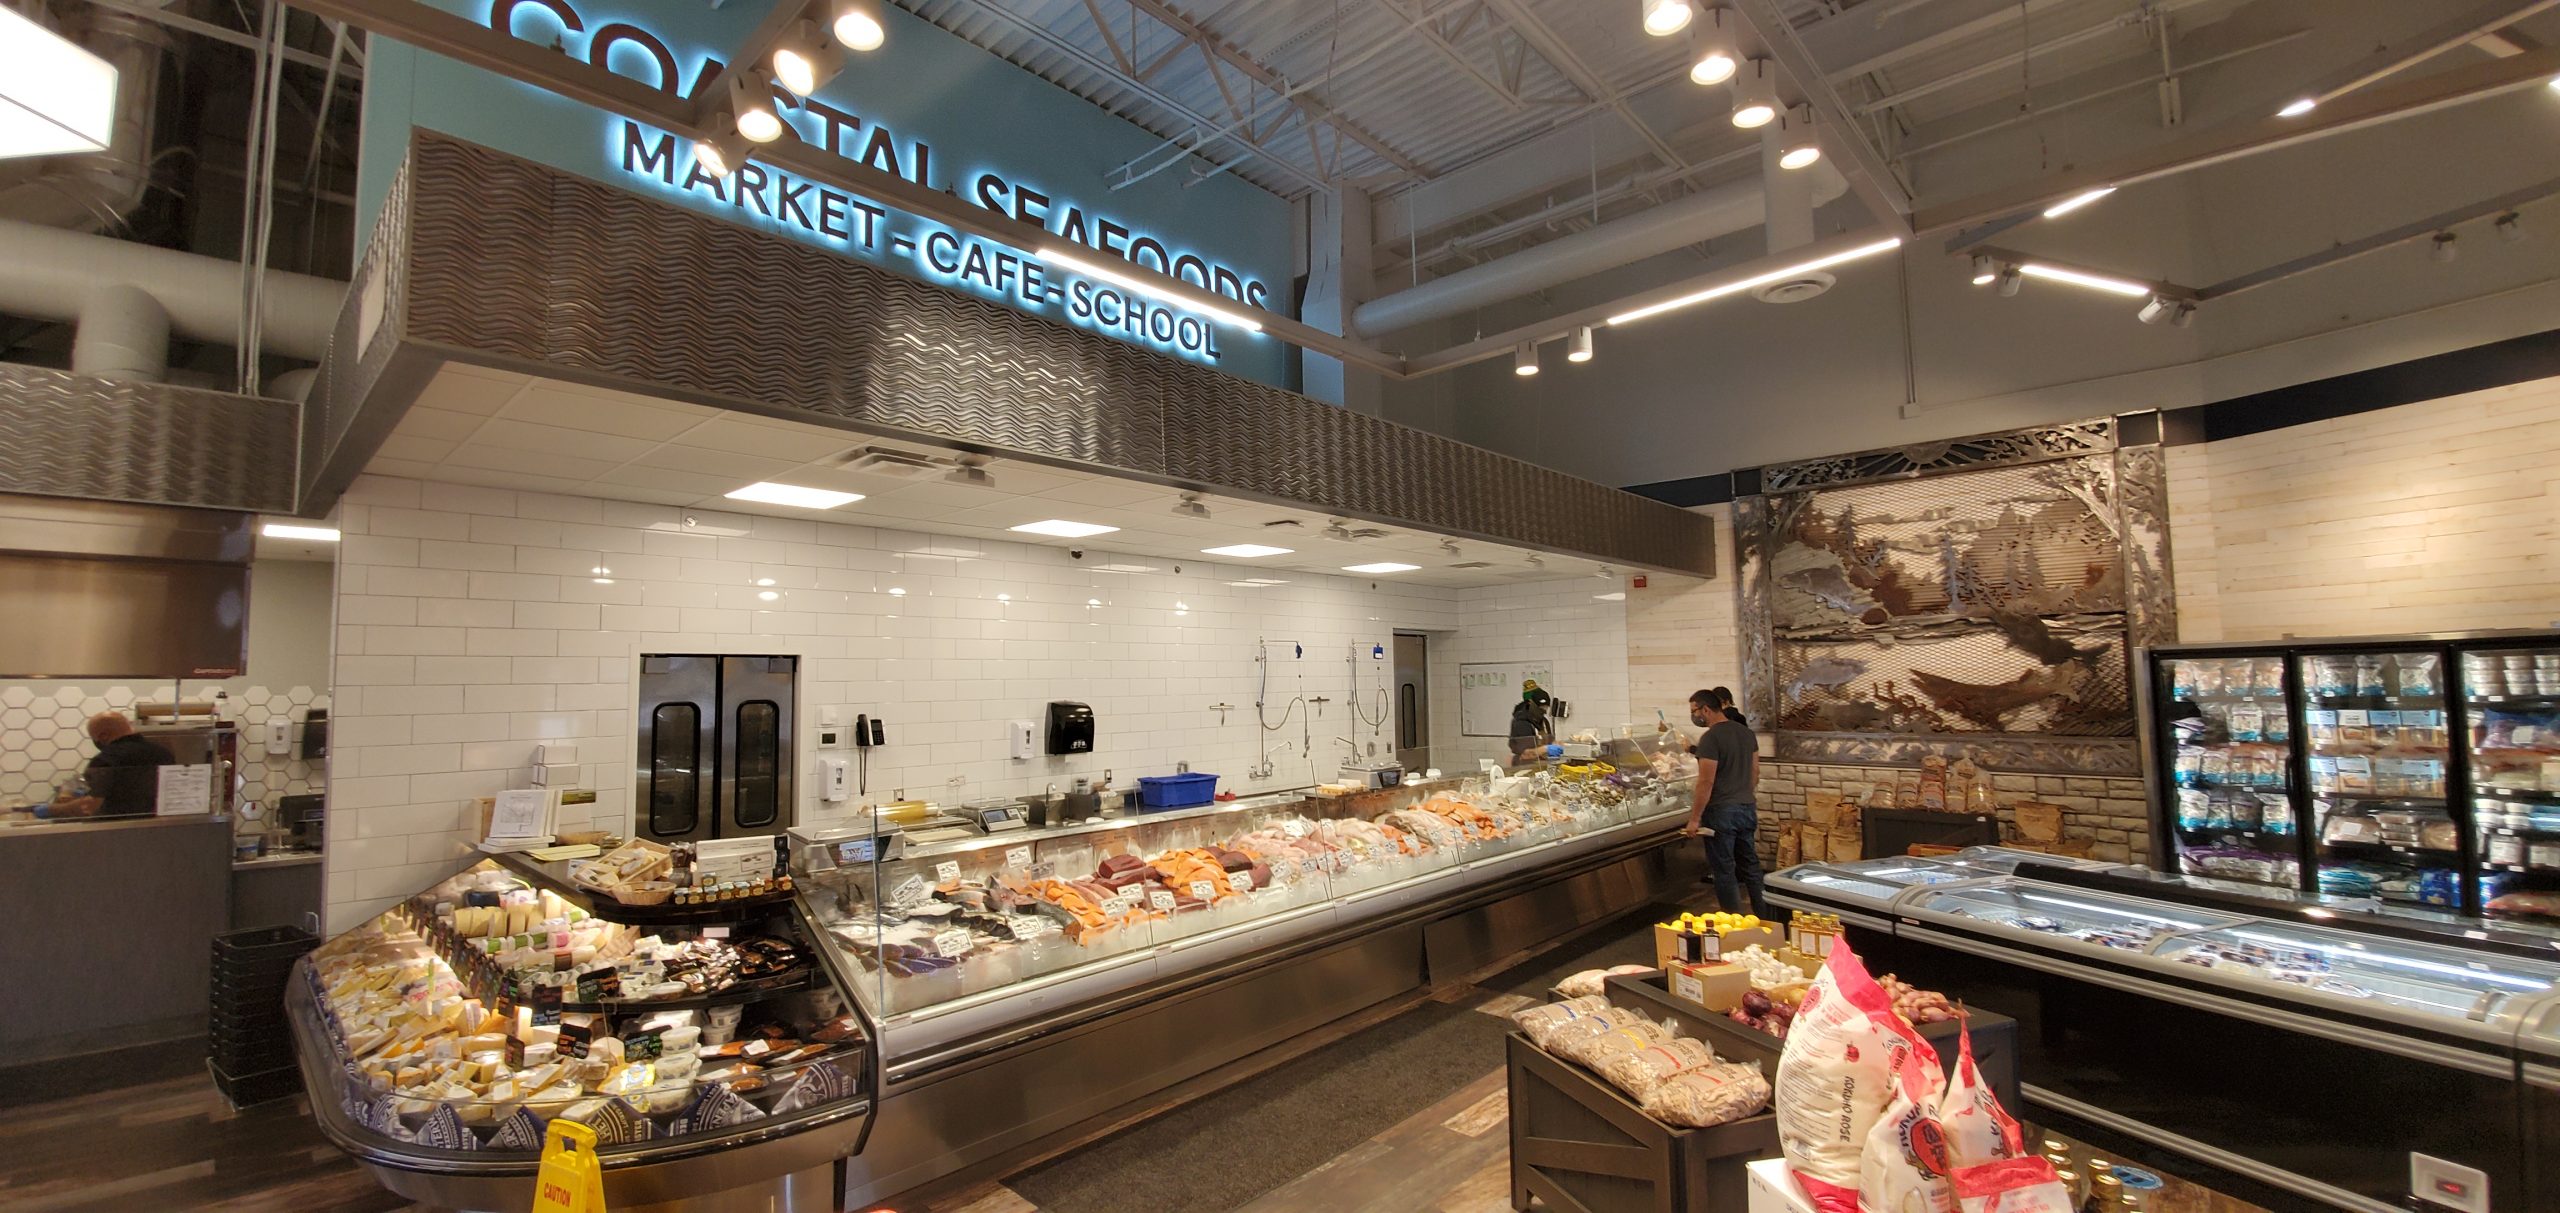 StoreMasters chose custom fixtures to offer full views and encourage customer interaction with the Coastal Seafood team